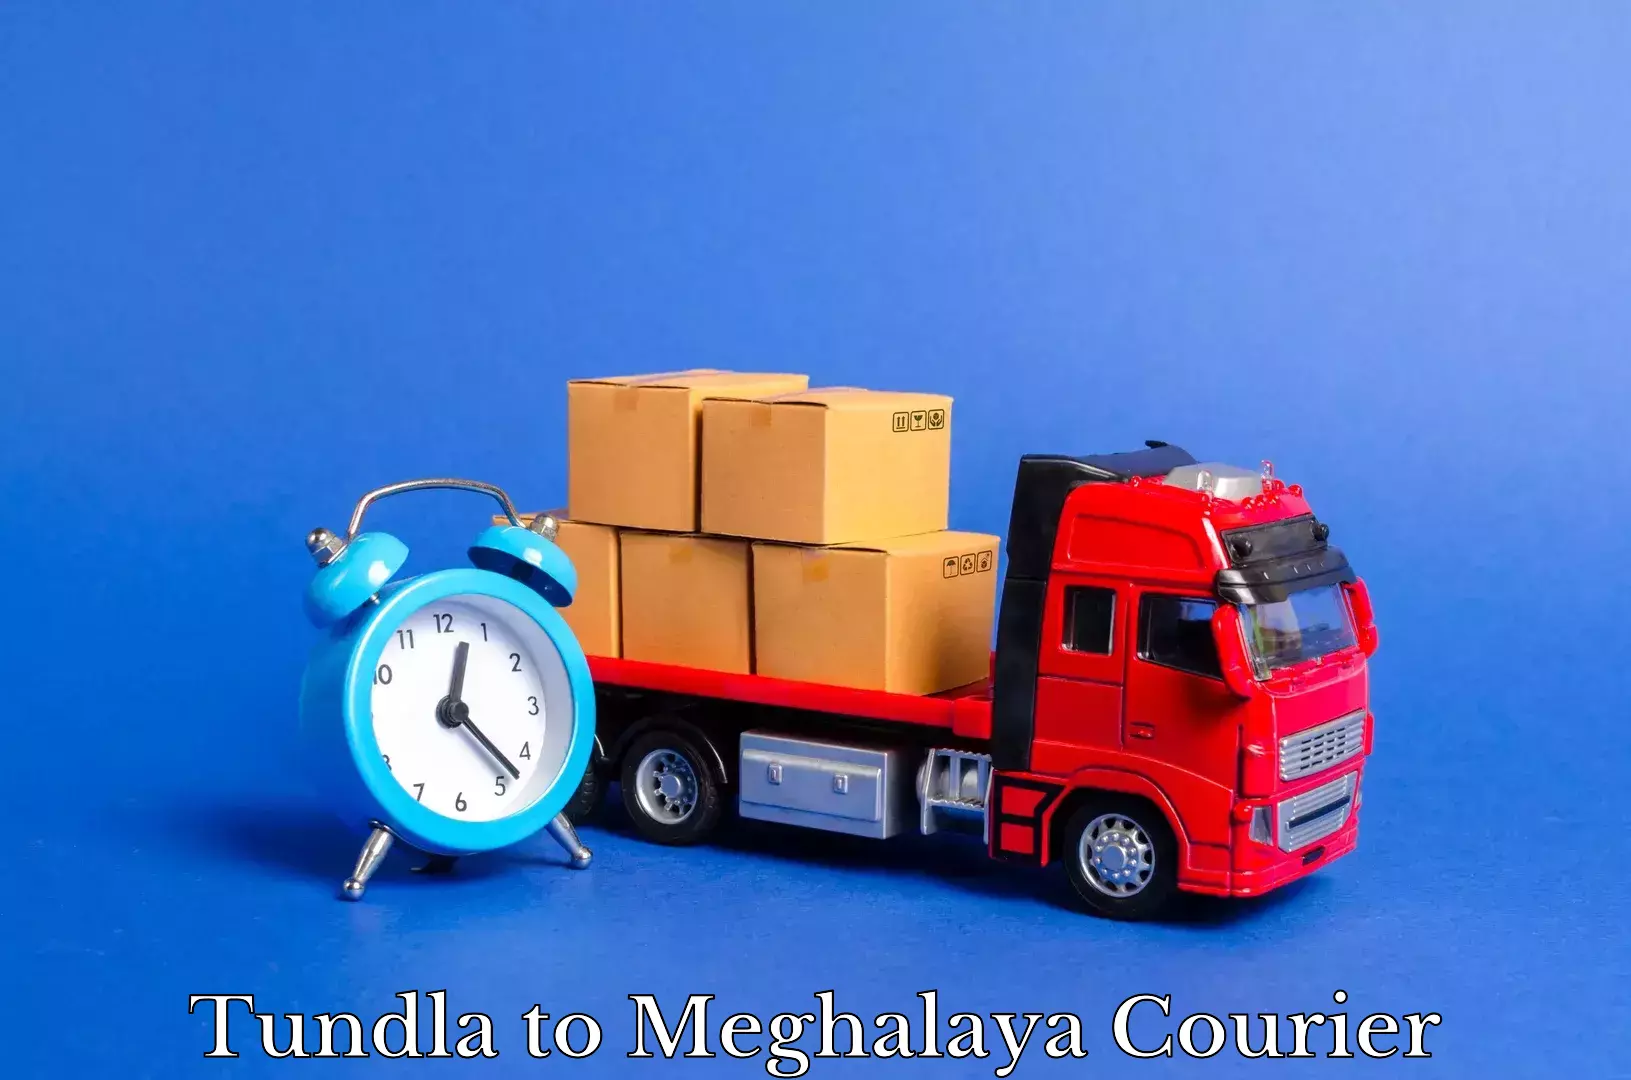 Professional movers and packers Tundla to Shillong